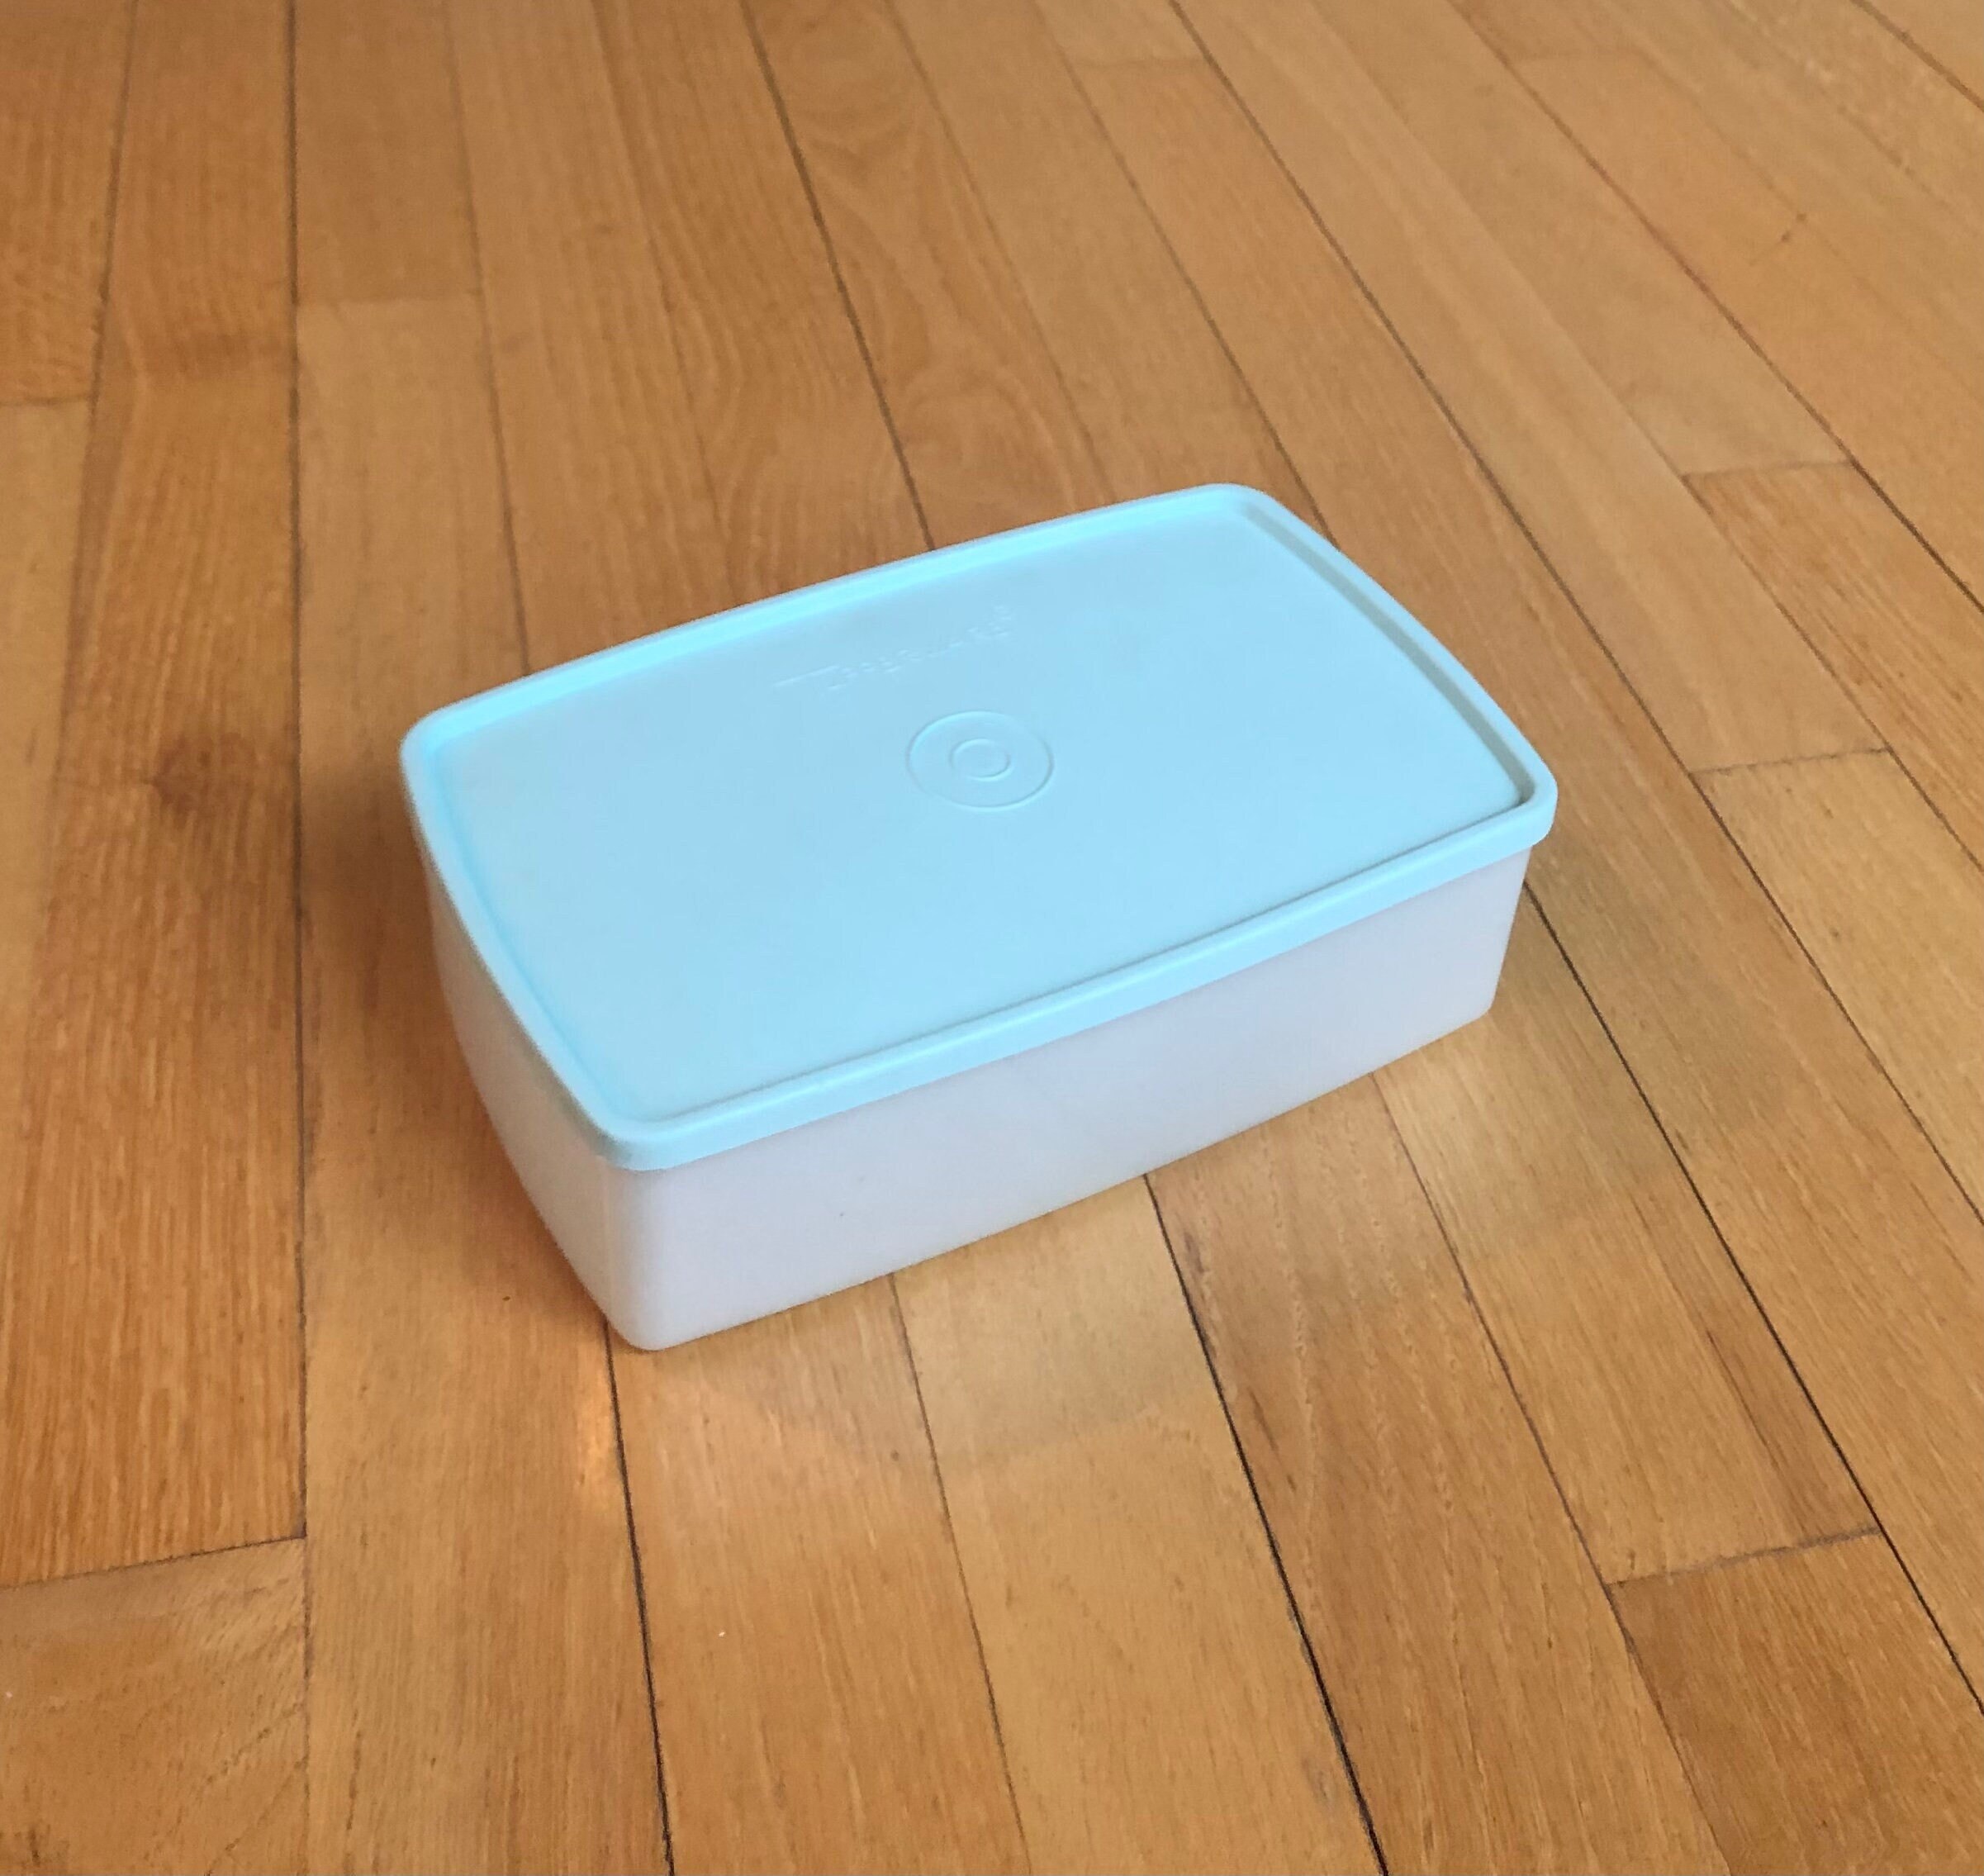 TUPPERWARE KEEPTABS 1 LARGE SQUARE STORAGE CONTAINER SEA GREEN